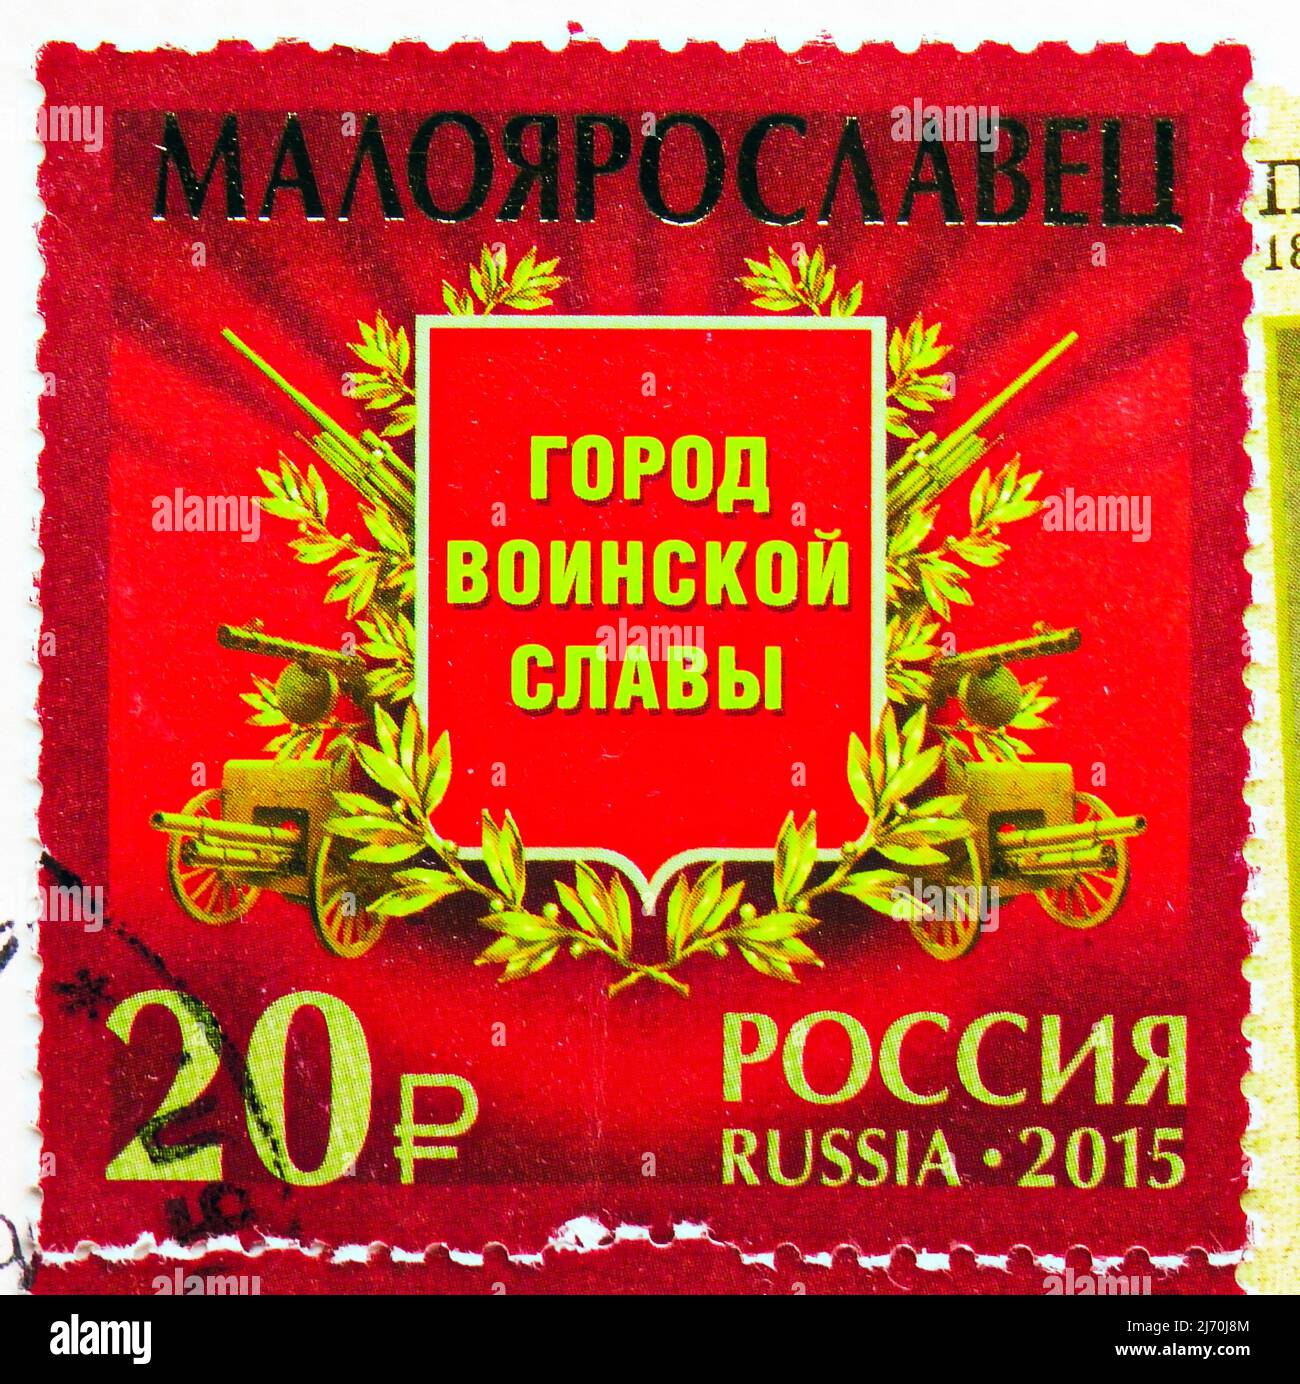 MOSCOW, RUSSIA - JUNE 10, 2021: Postage stamp printed in Russia shows Maloyaroslavets, Cities of Military Glory serie, circa 2015 Stock Photo